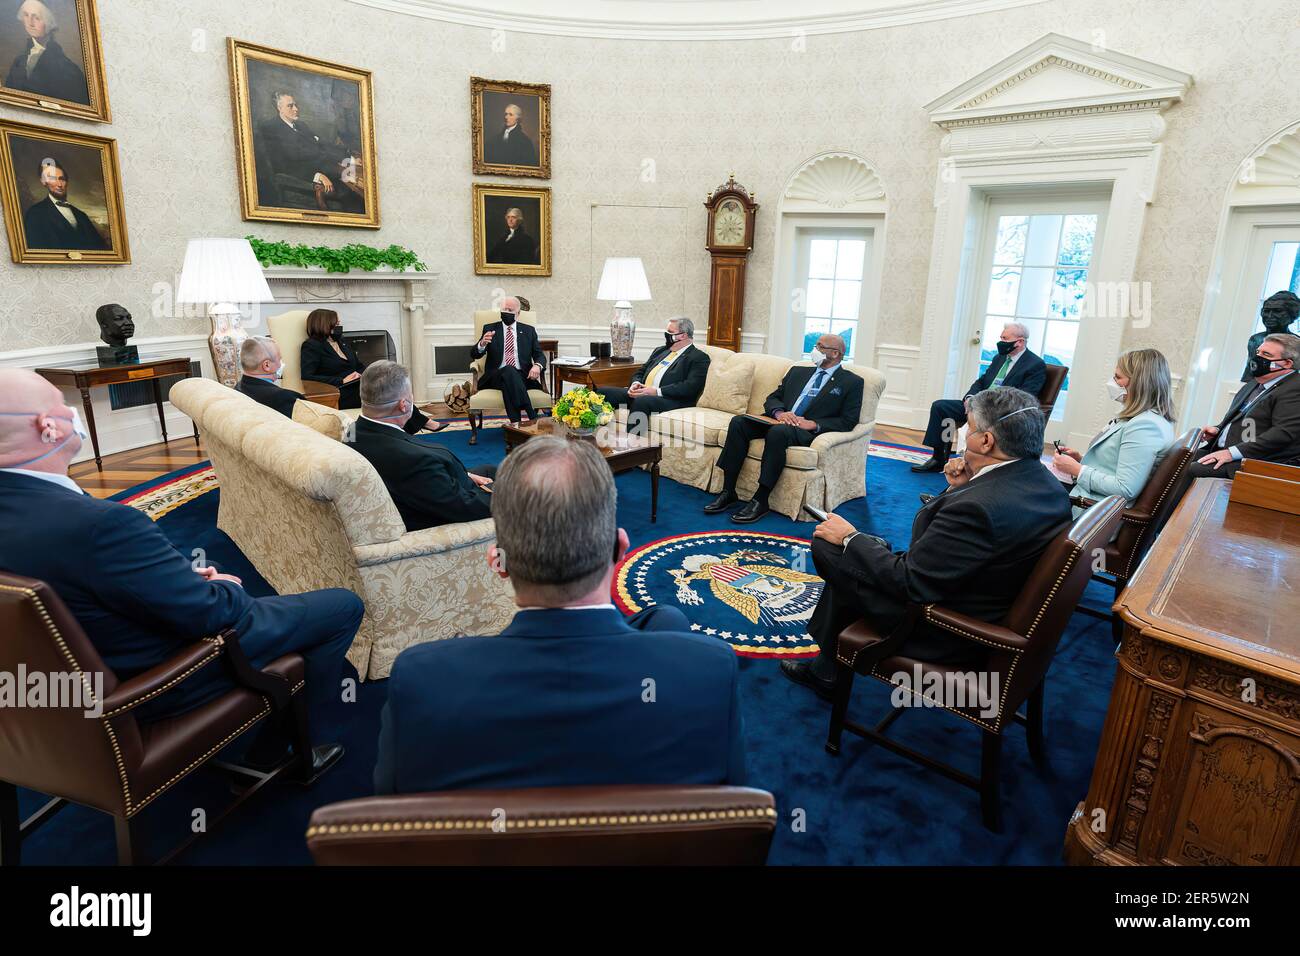 President Joe Biden and Vice President Kamala Harris meet with labor leaders Wednesday, Feb. 17, 2021, in the Oval Office of the White House. (Official White House Photo by Adam Schultz) Stock Photo